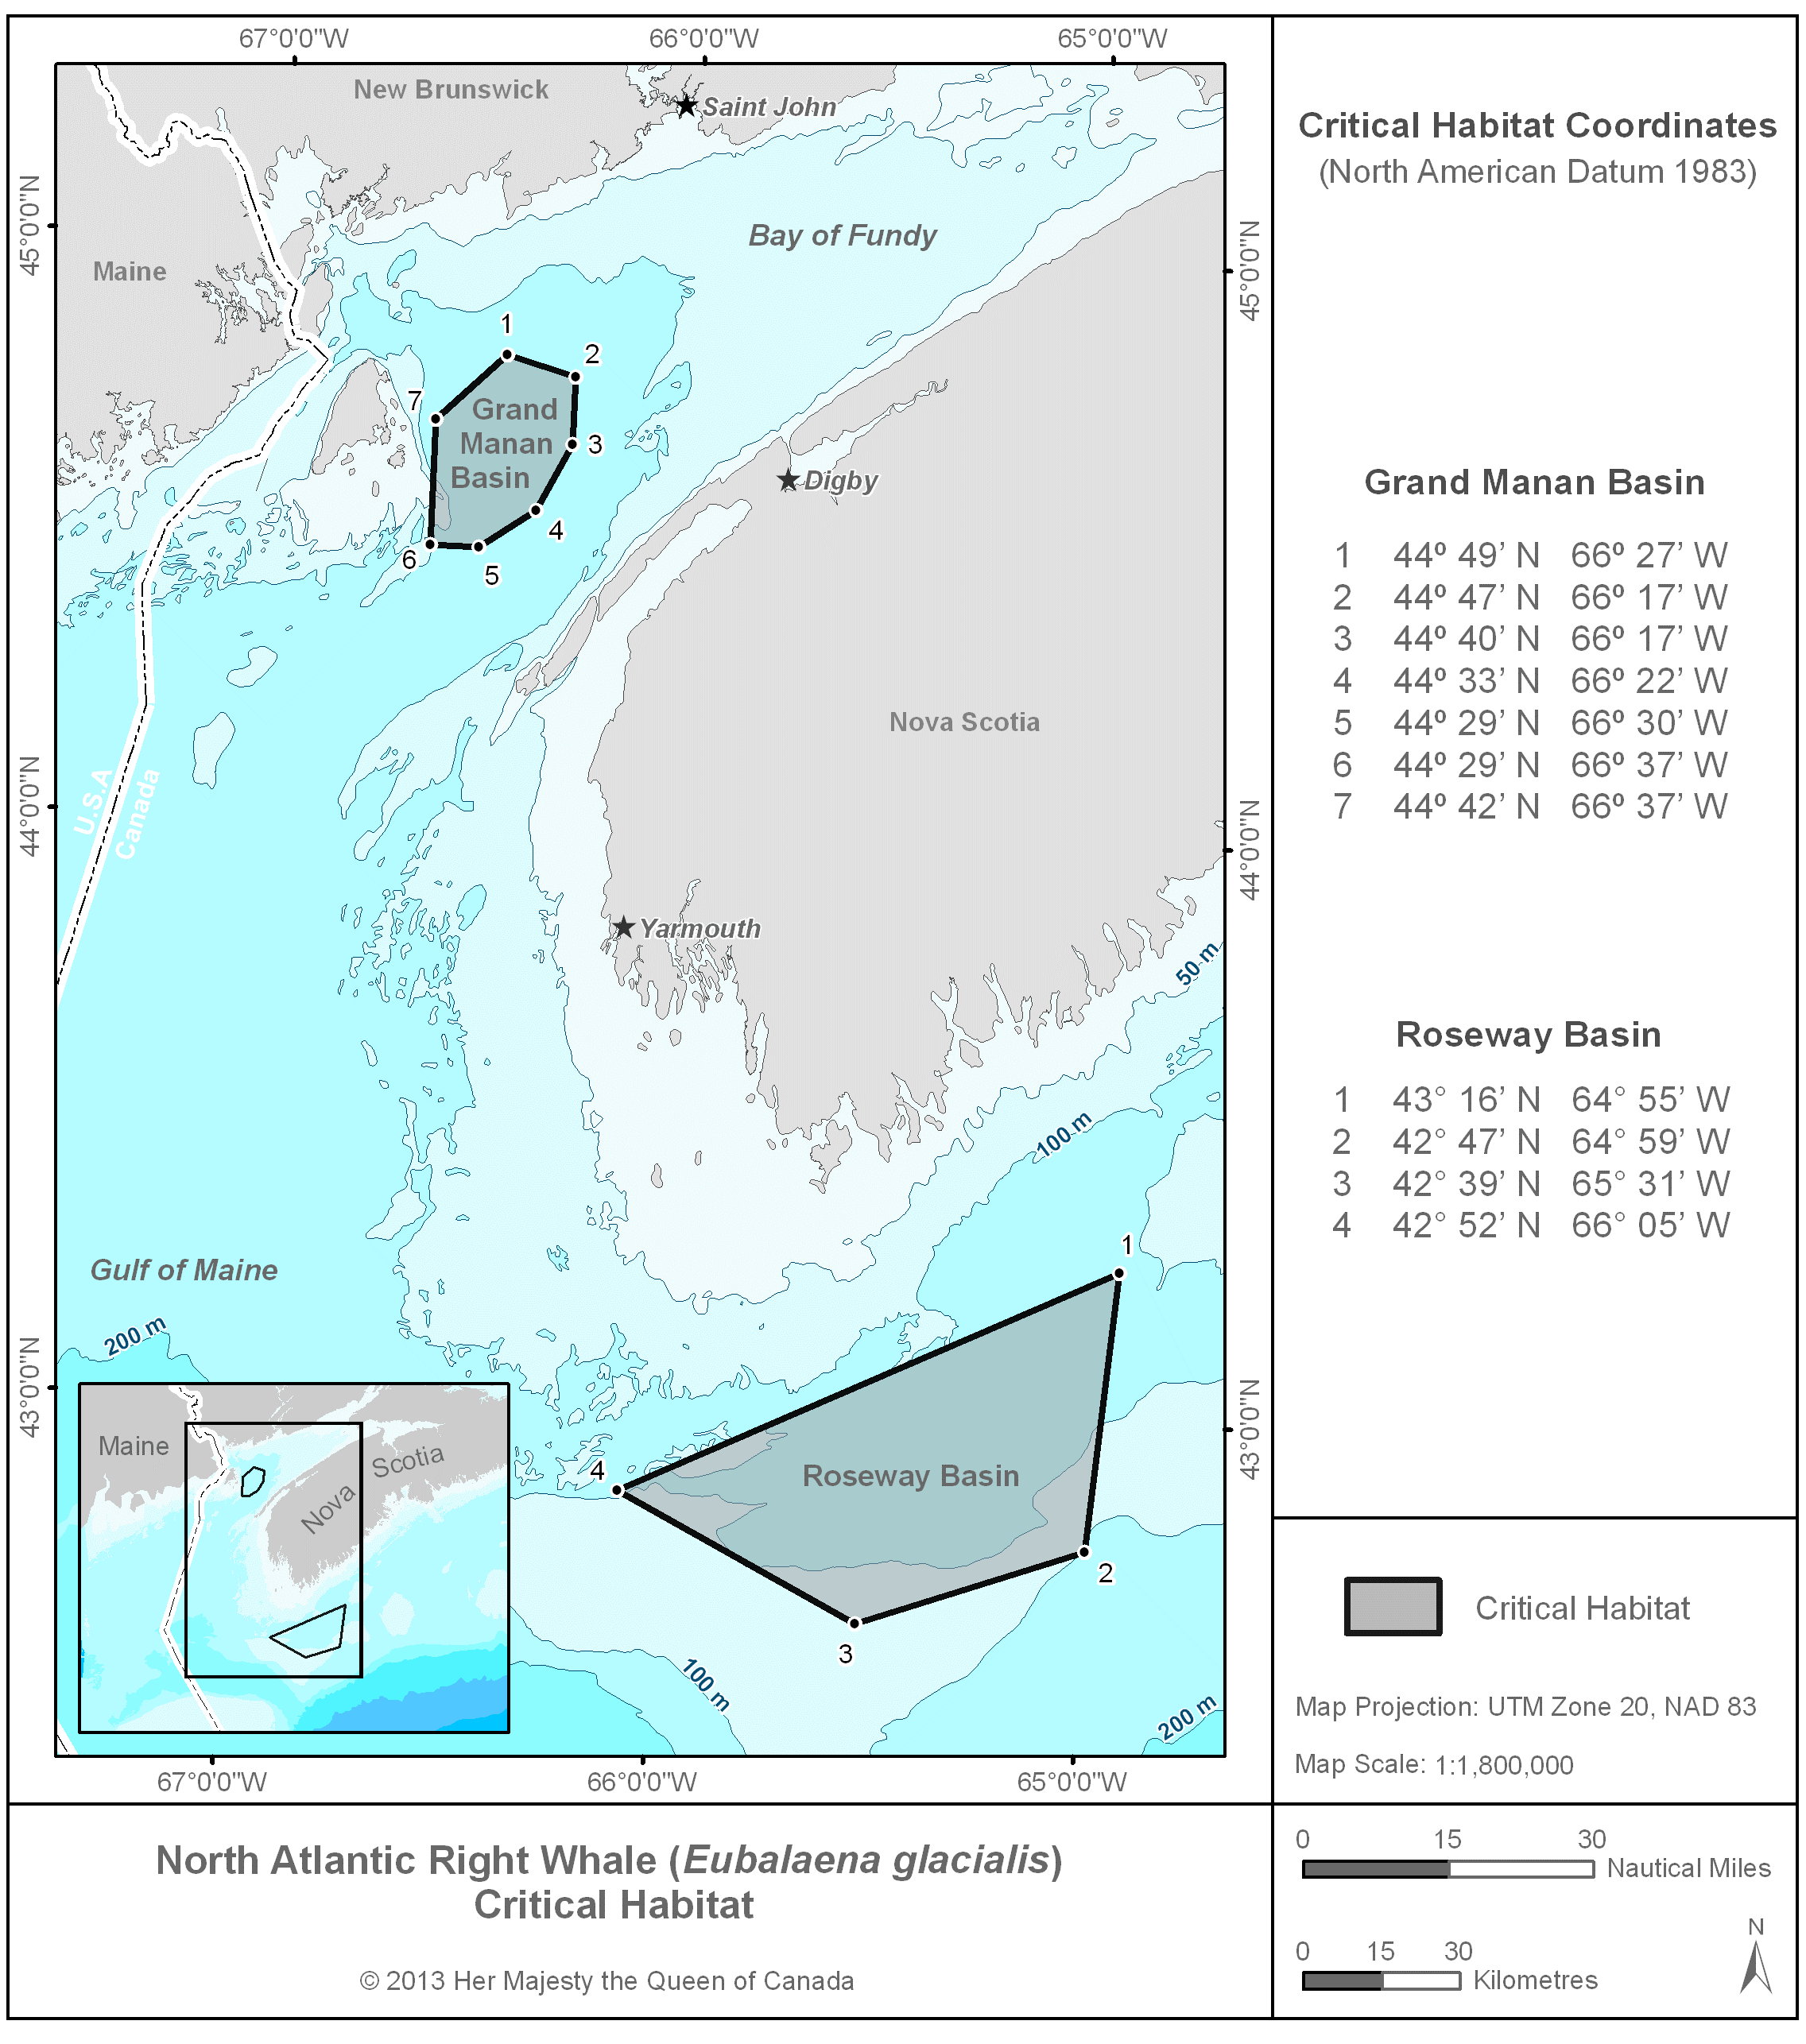 Rectangular blue and grey map showing the critical habitat for the North Atlantic right whales, with coordinates to Grand Manan Basin and Roseway Basin.